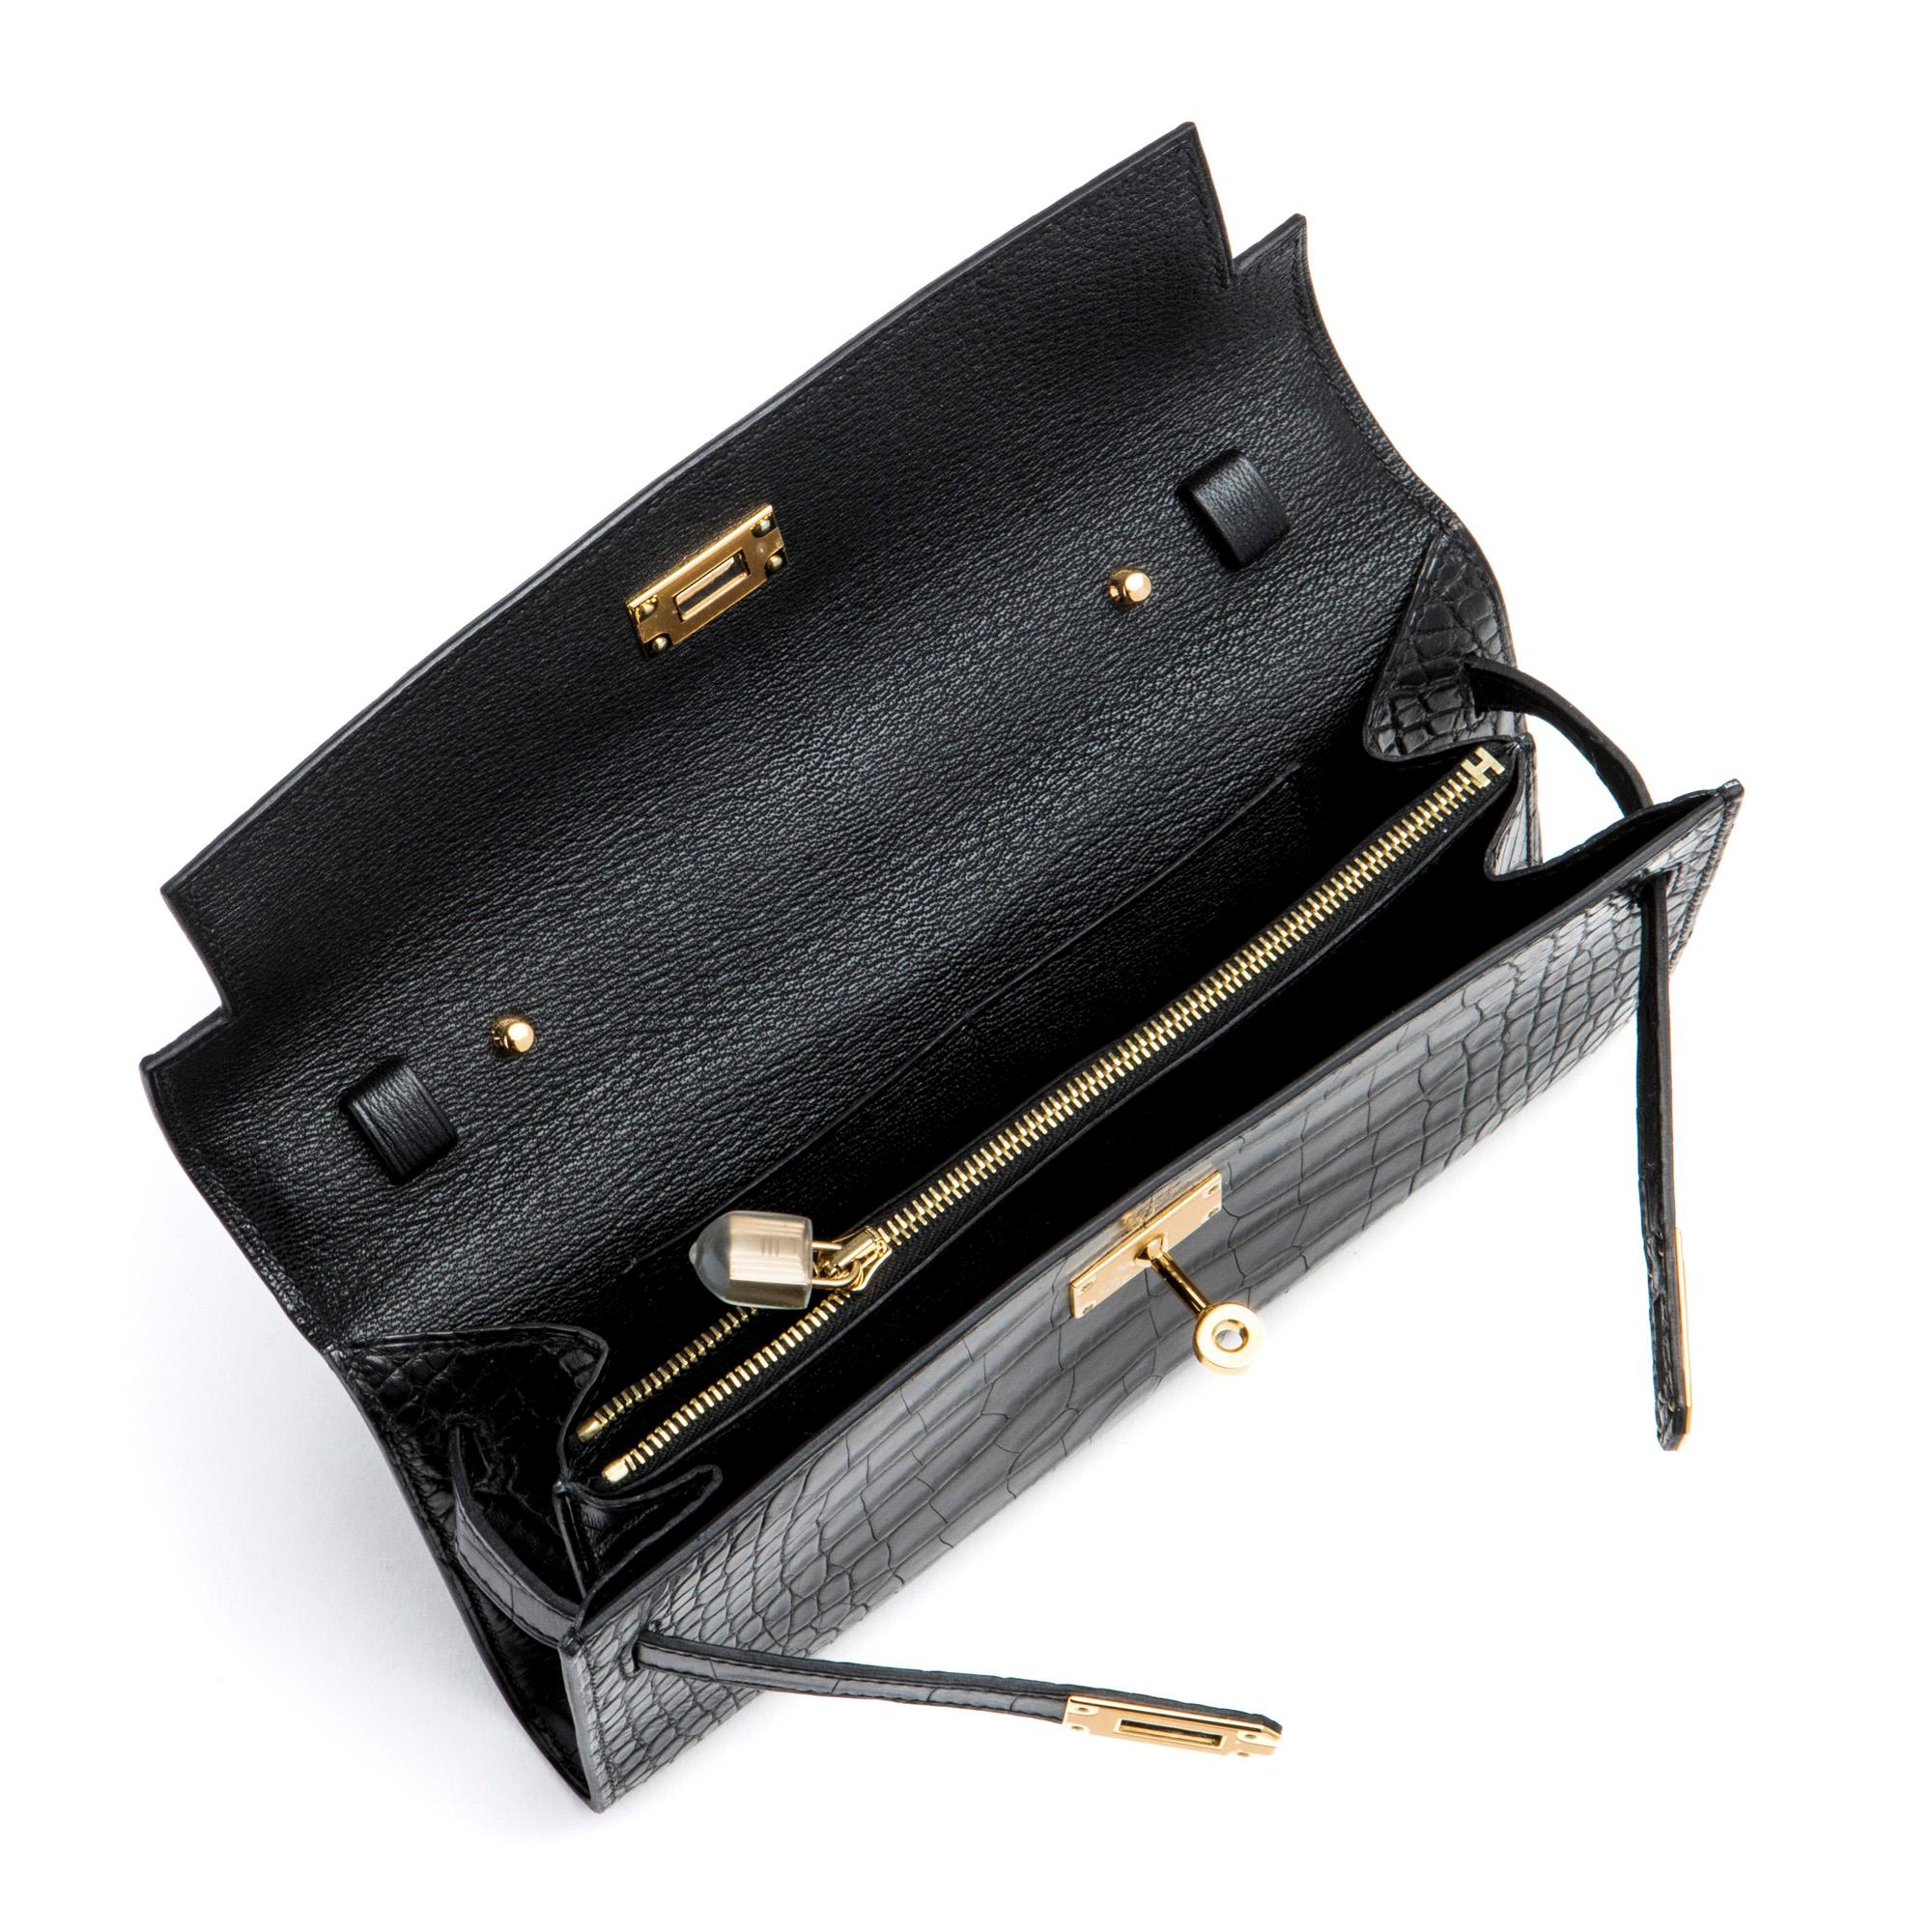 Hermés Mississipiensis Alligator Clutch In Excellent Condition For Sale In New York, NY